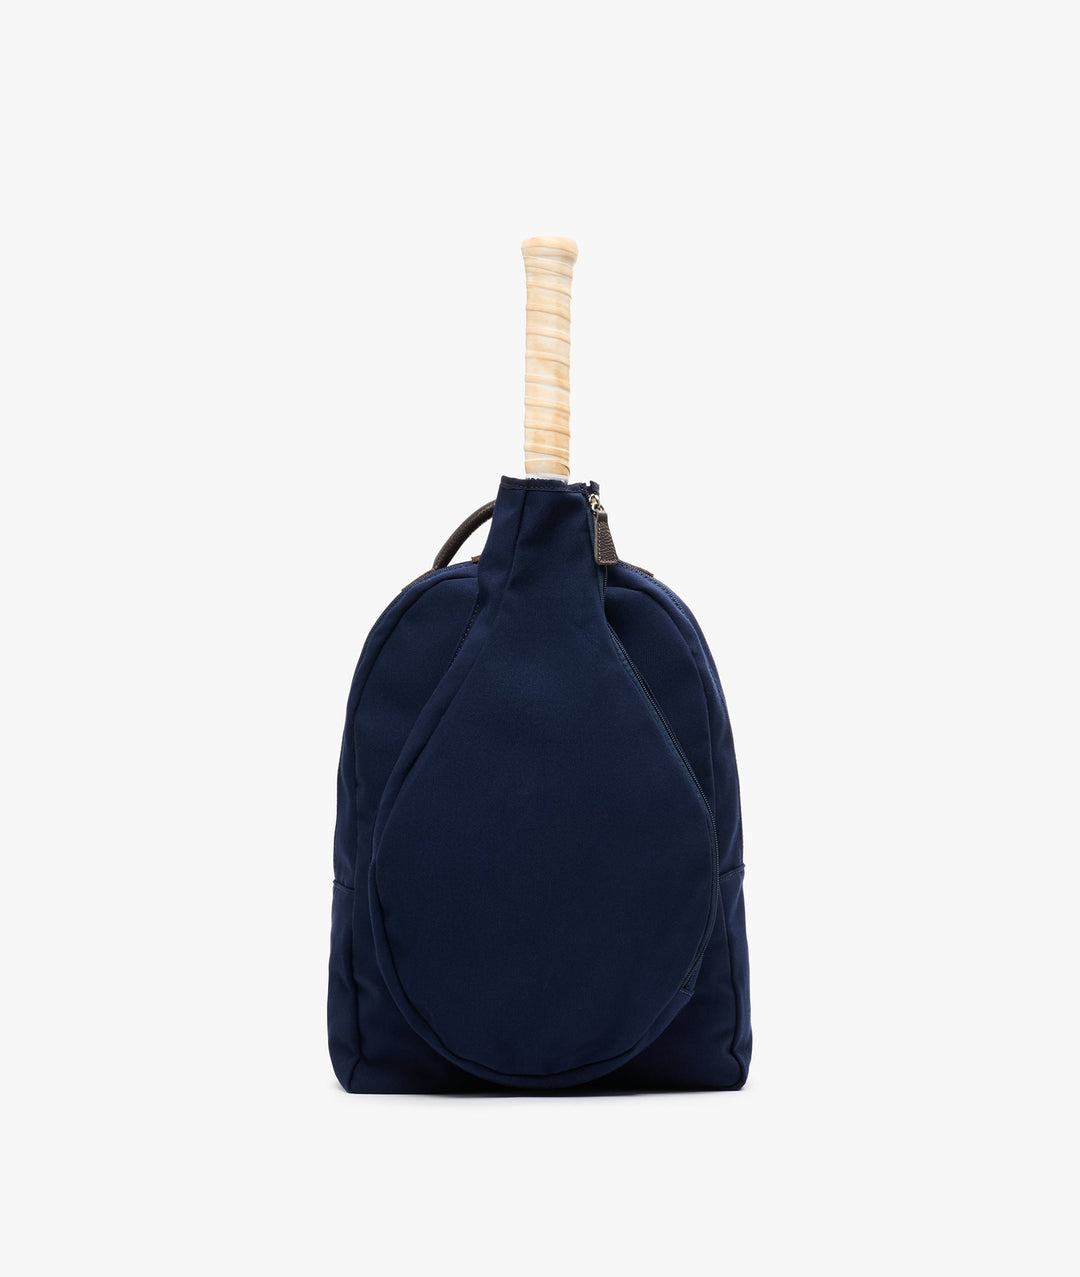 MyStyleBags Tennis/Padel Backpack My Style Bags Glamour Tennis/Padel Backpack Blue Carry Your Gear in Style: Tennis/Padel Backpacks My Style Bags  Brand